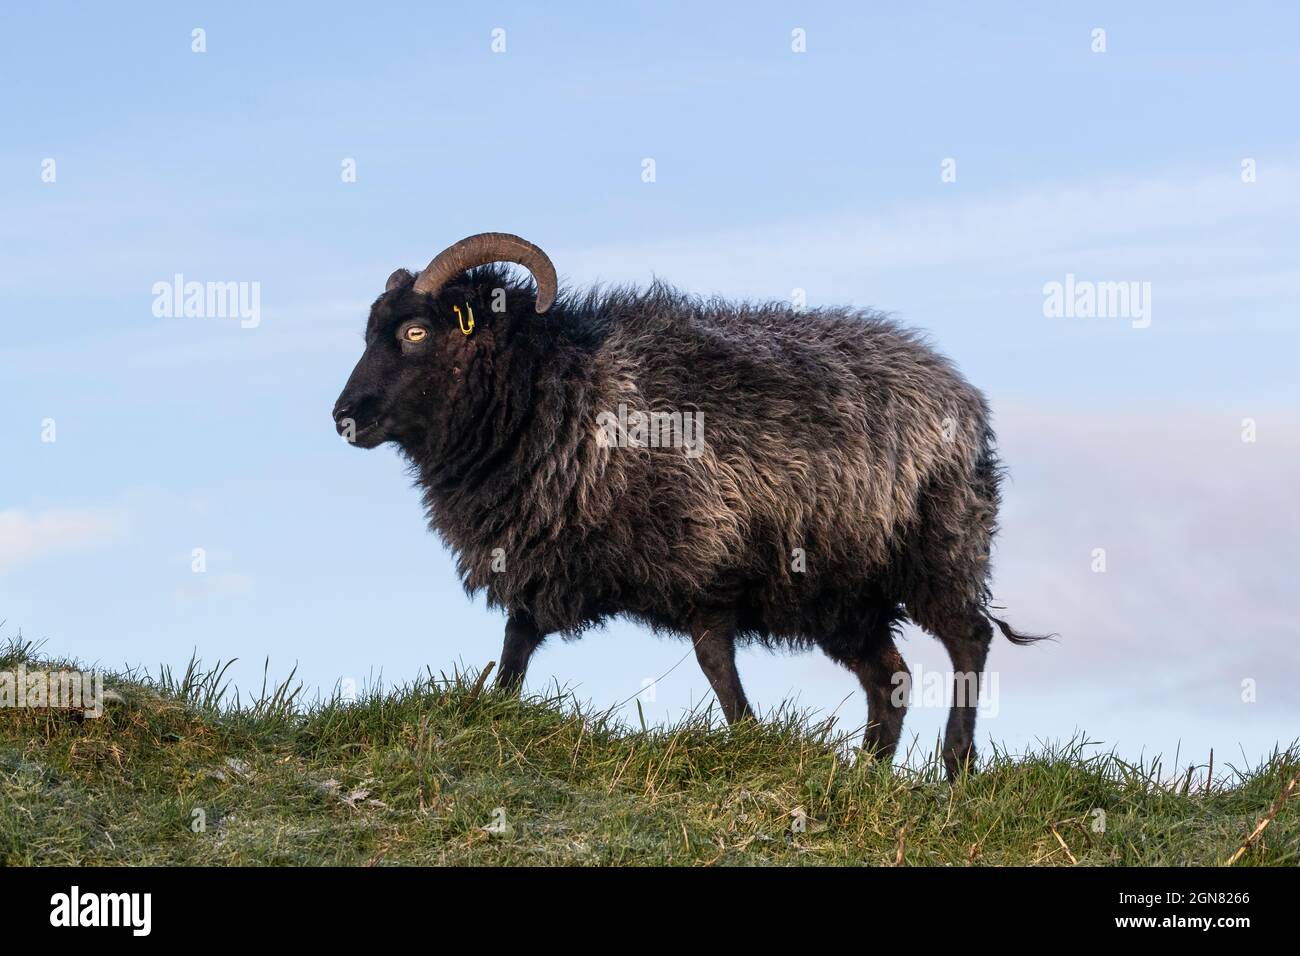 Hebridean sheep, rare breed used in conservation grazing, Caerlaverock Wildfowl and Wetland Trust reserve, Dumfries and Galloway, Scotland, UK Stock Photo